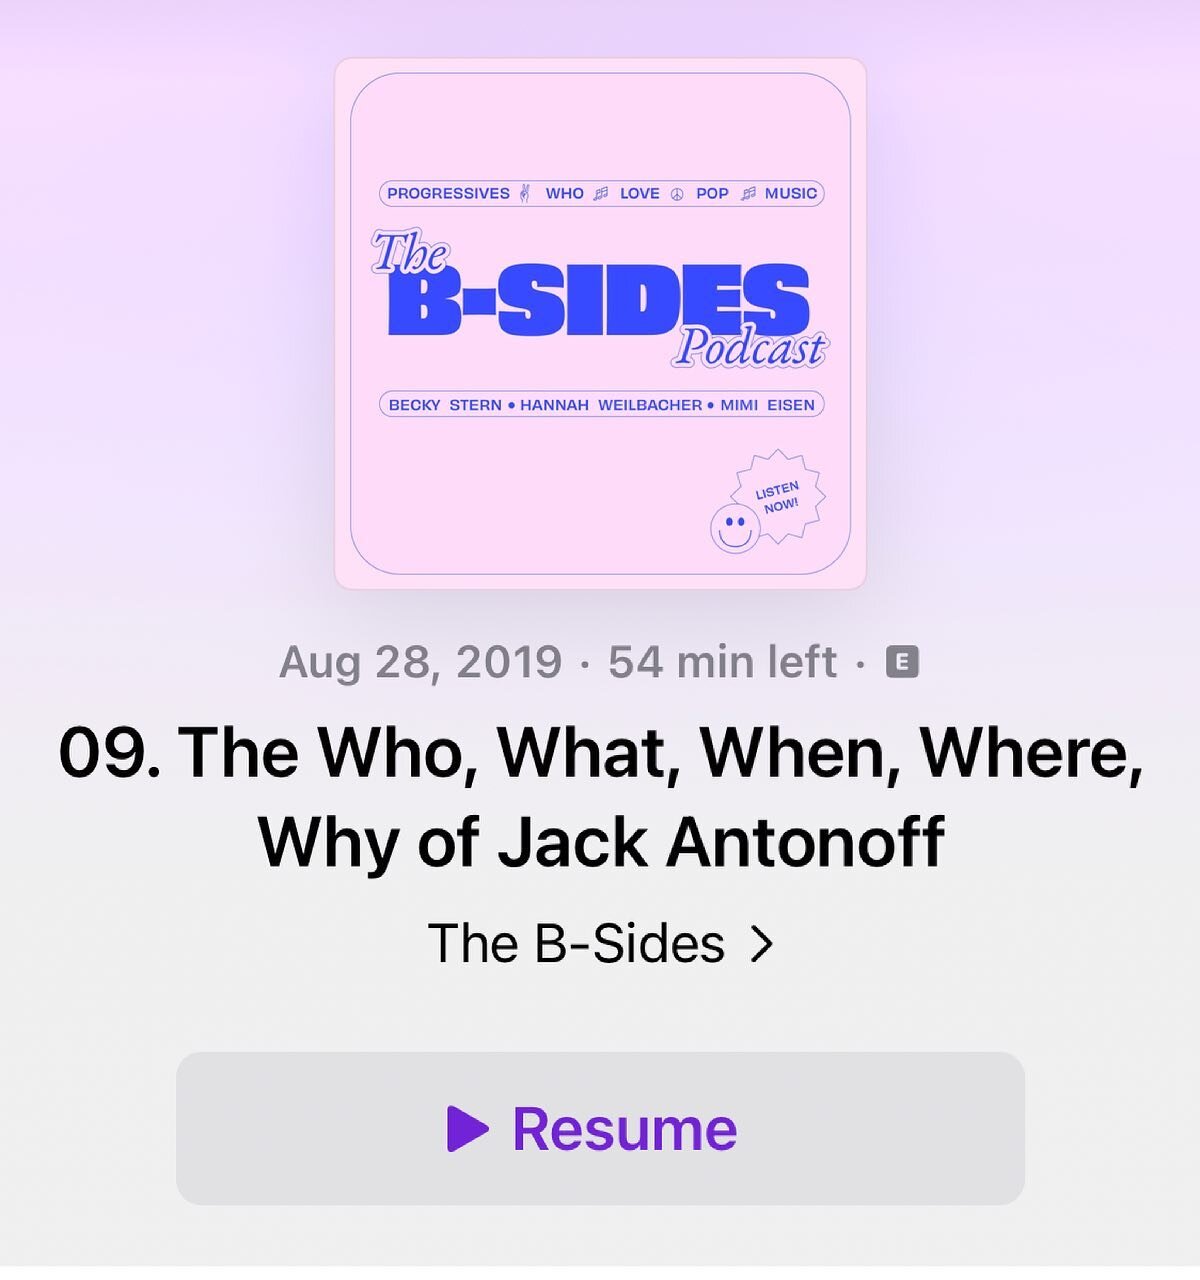 Due to some unforeseen life stuff, we do not have a new episode this week 😣 BUT we do want to celebrate #waybackwednesday, so join us in listening to our @jackantonoff episode from almost two years ago. @bleachersmusic is coming out with a new album